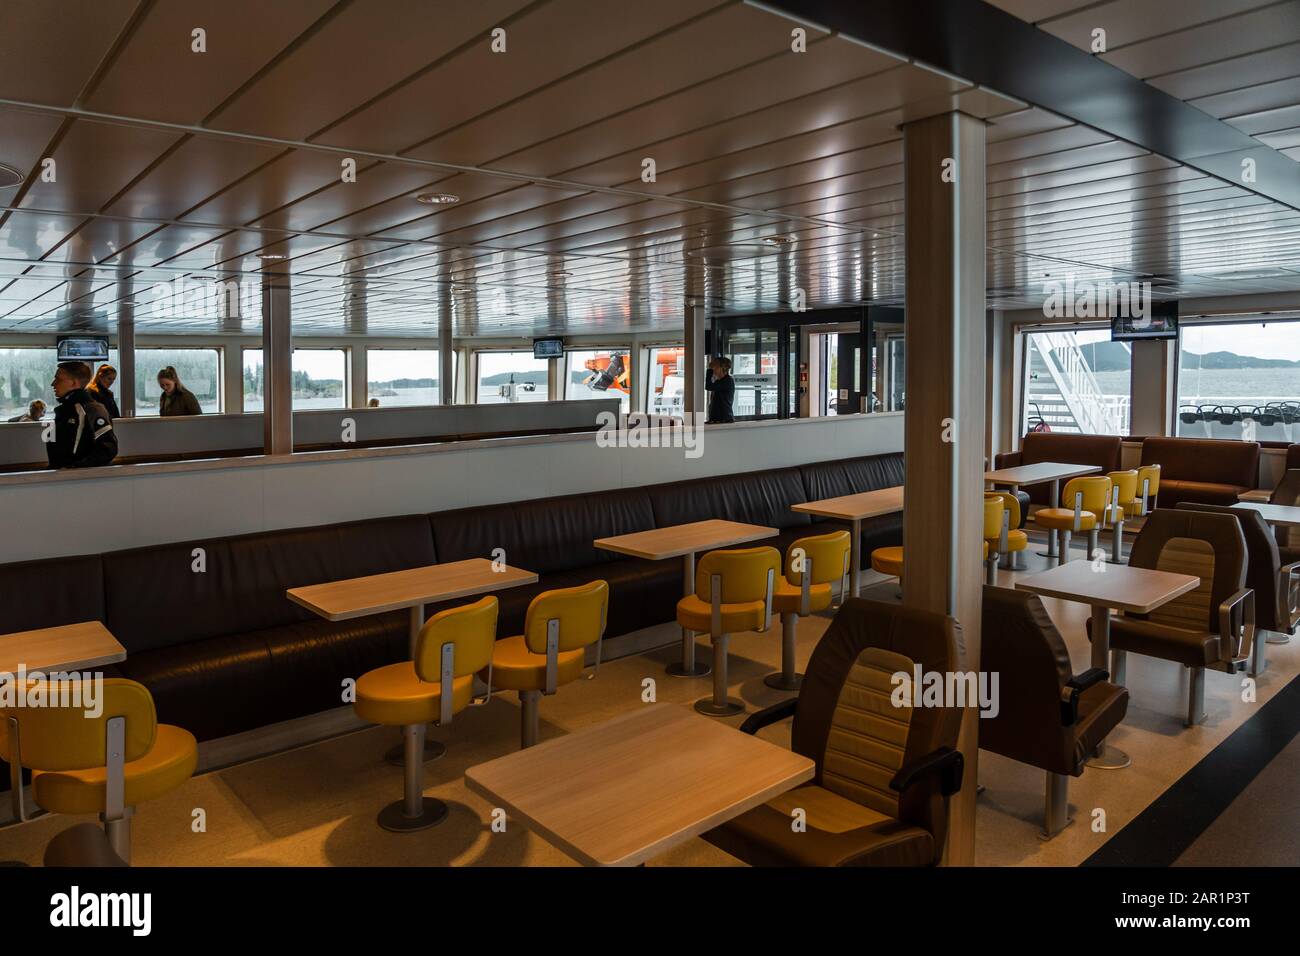 Editorial 09.03.2019 Halhjem Norway, inside one of the car ferries between Halhjem and Sandvikvåg that transports passengers with cars Stock Photo